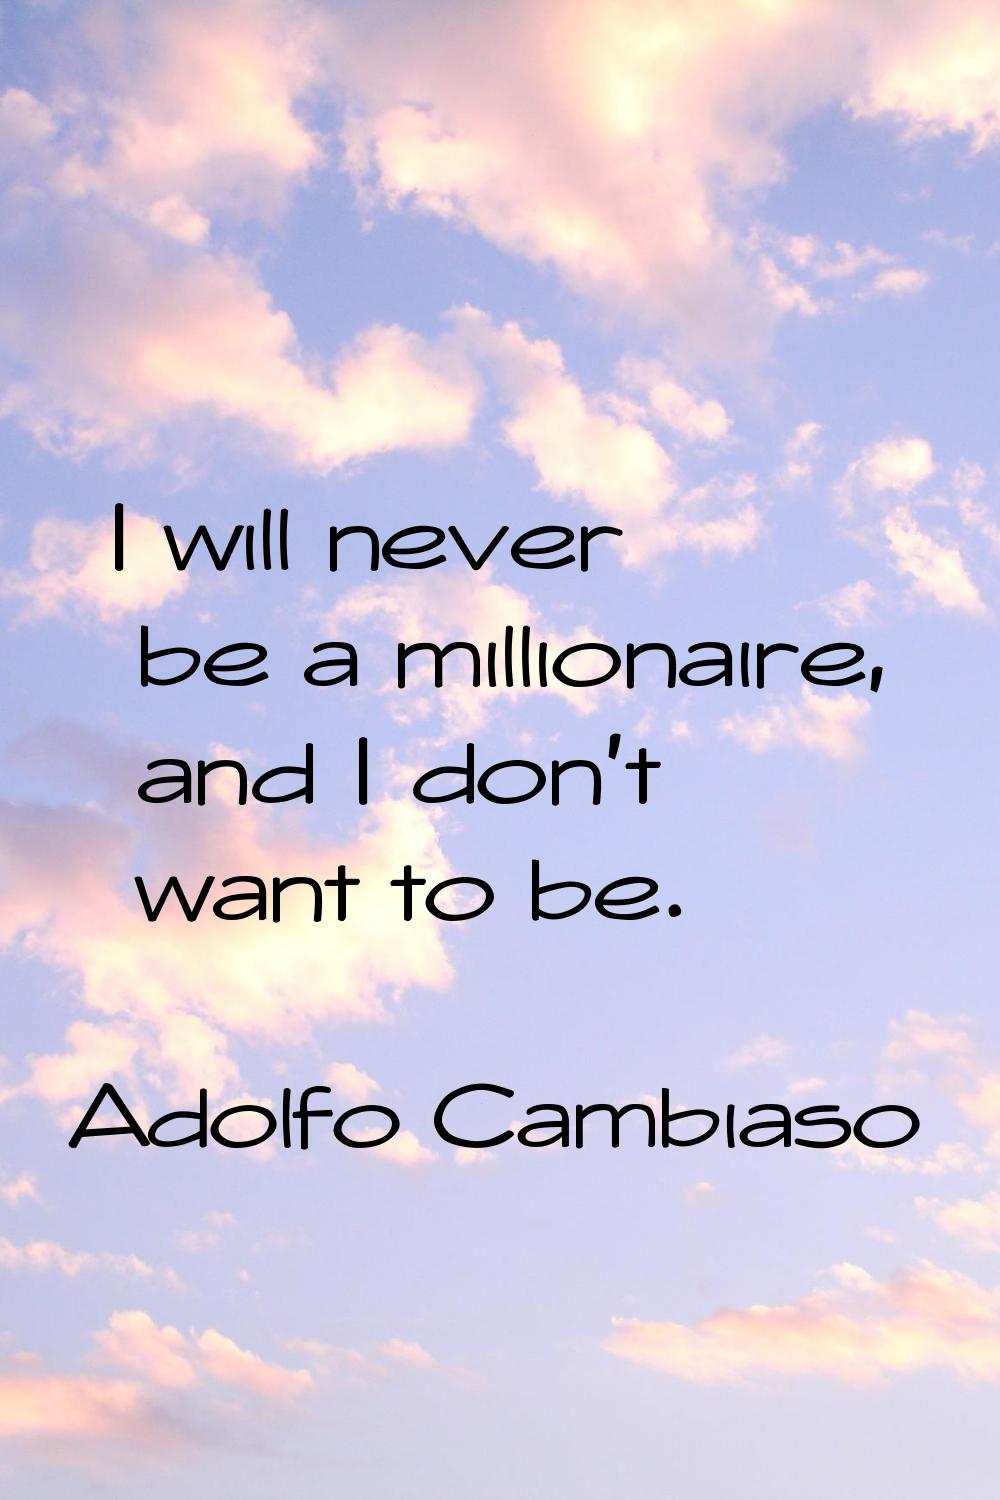 I will never be a millionaire, and I don't want to be.